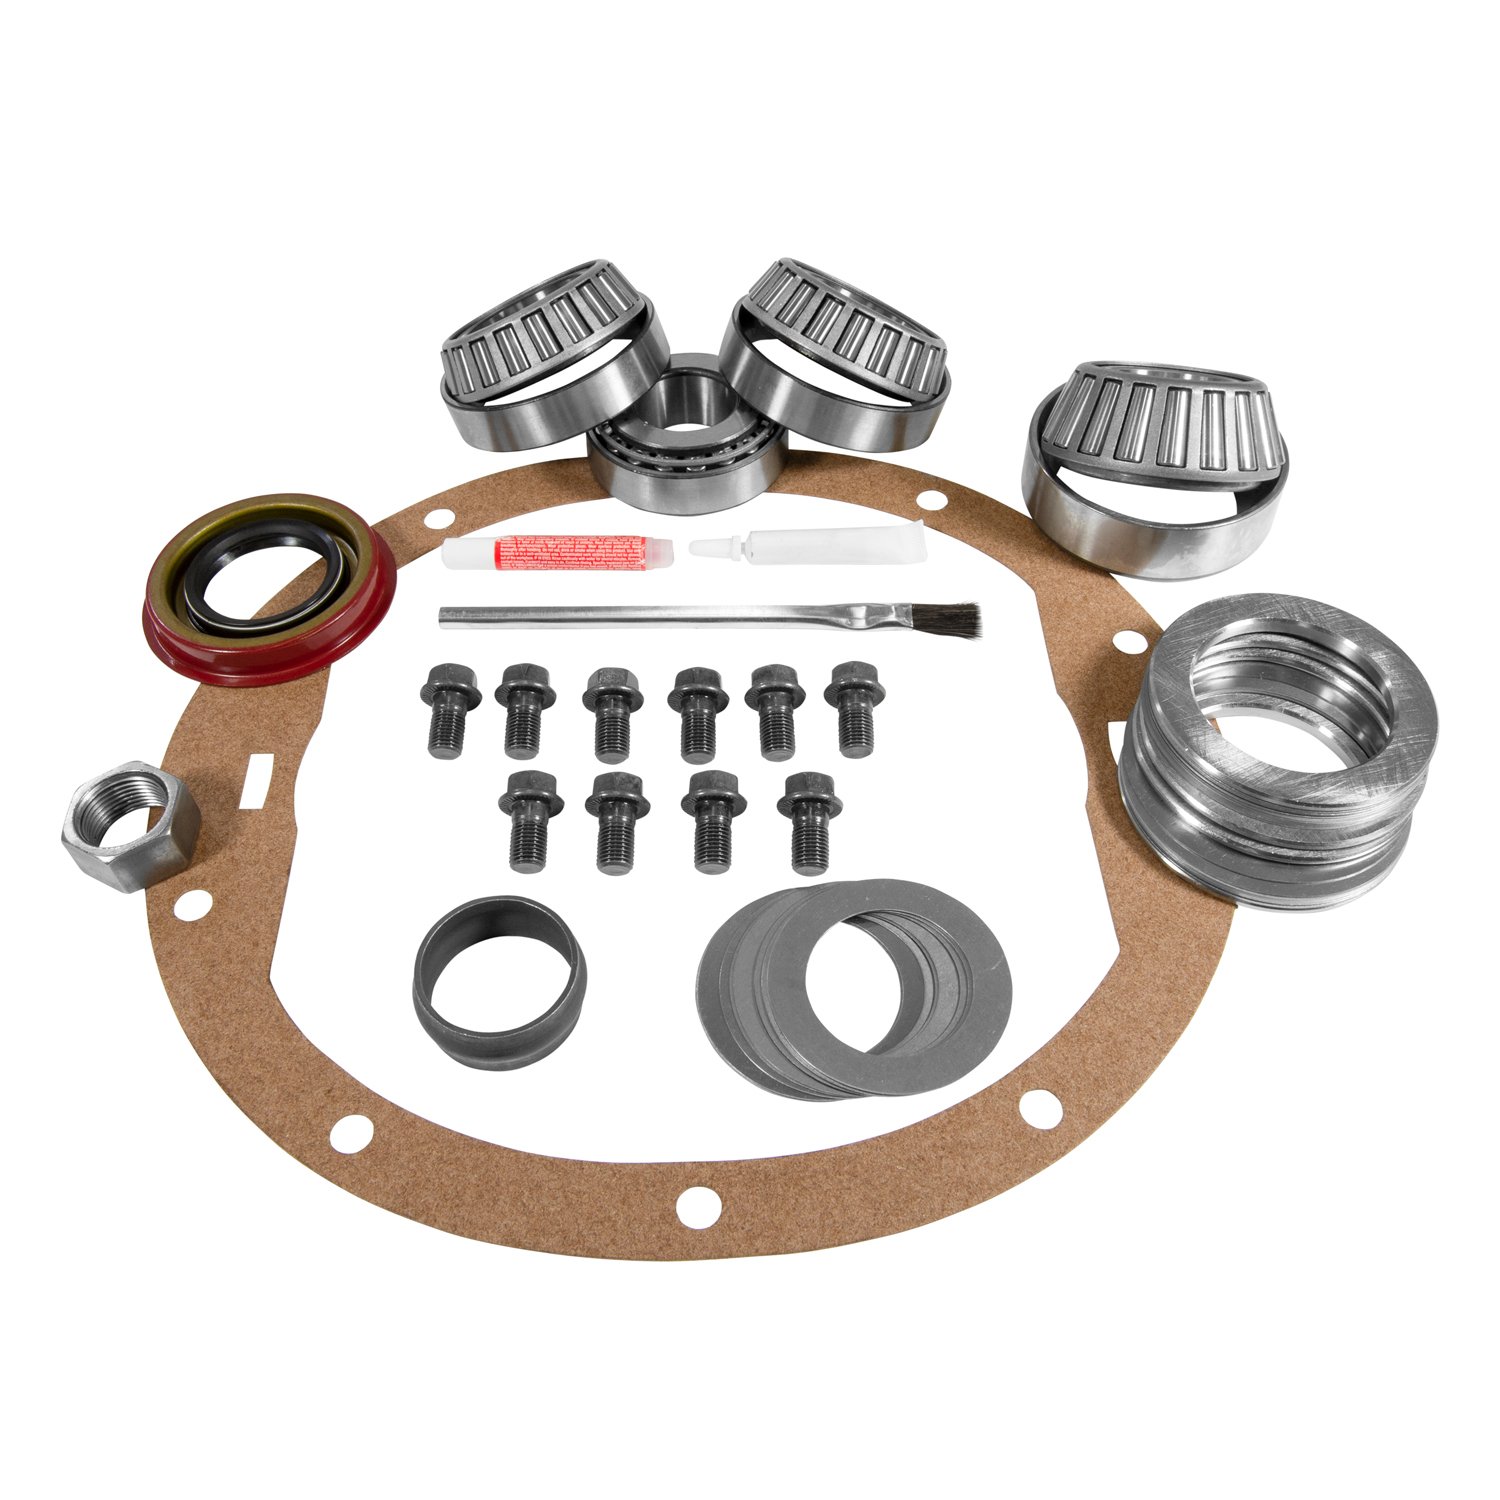 USA Standard ZK GM8.2 Master Overhaul Kit, For The '64-'72 GM 8.2 in. 10-Bolt Differential